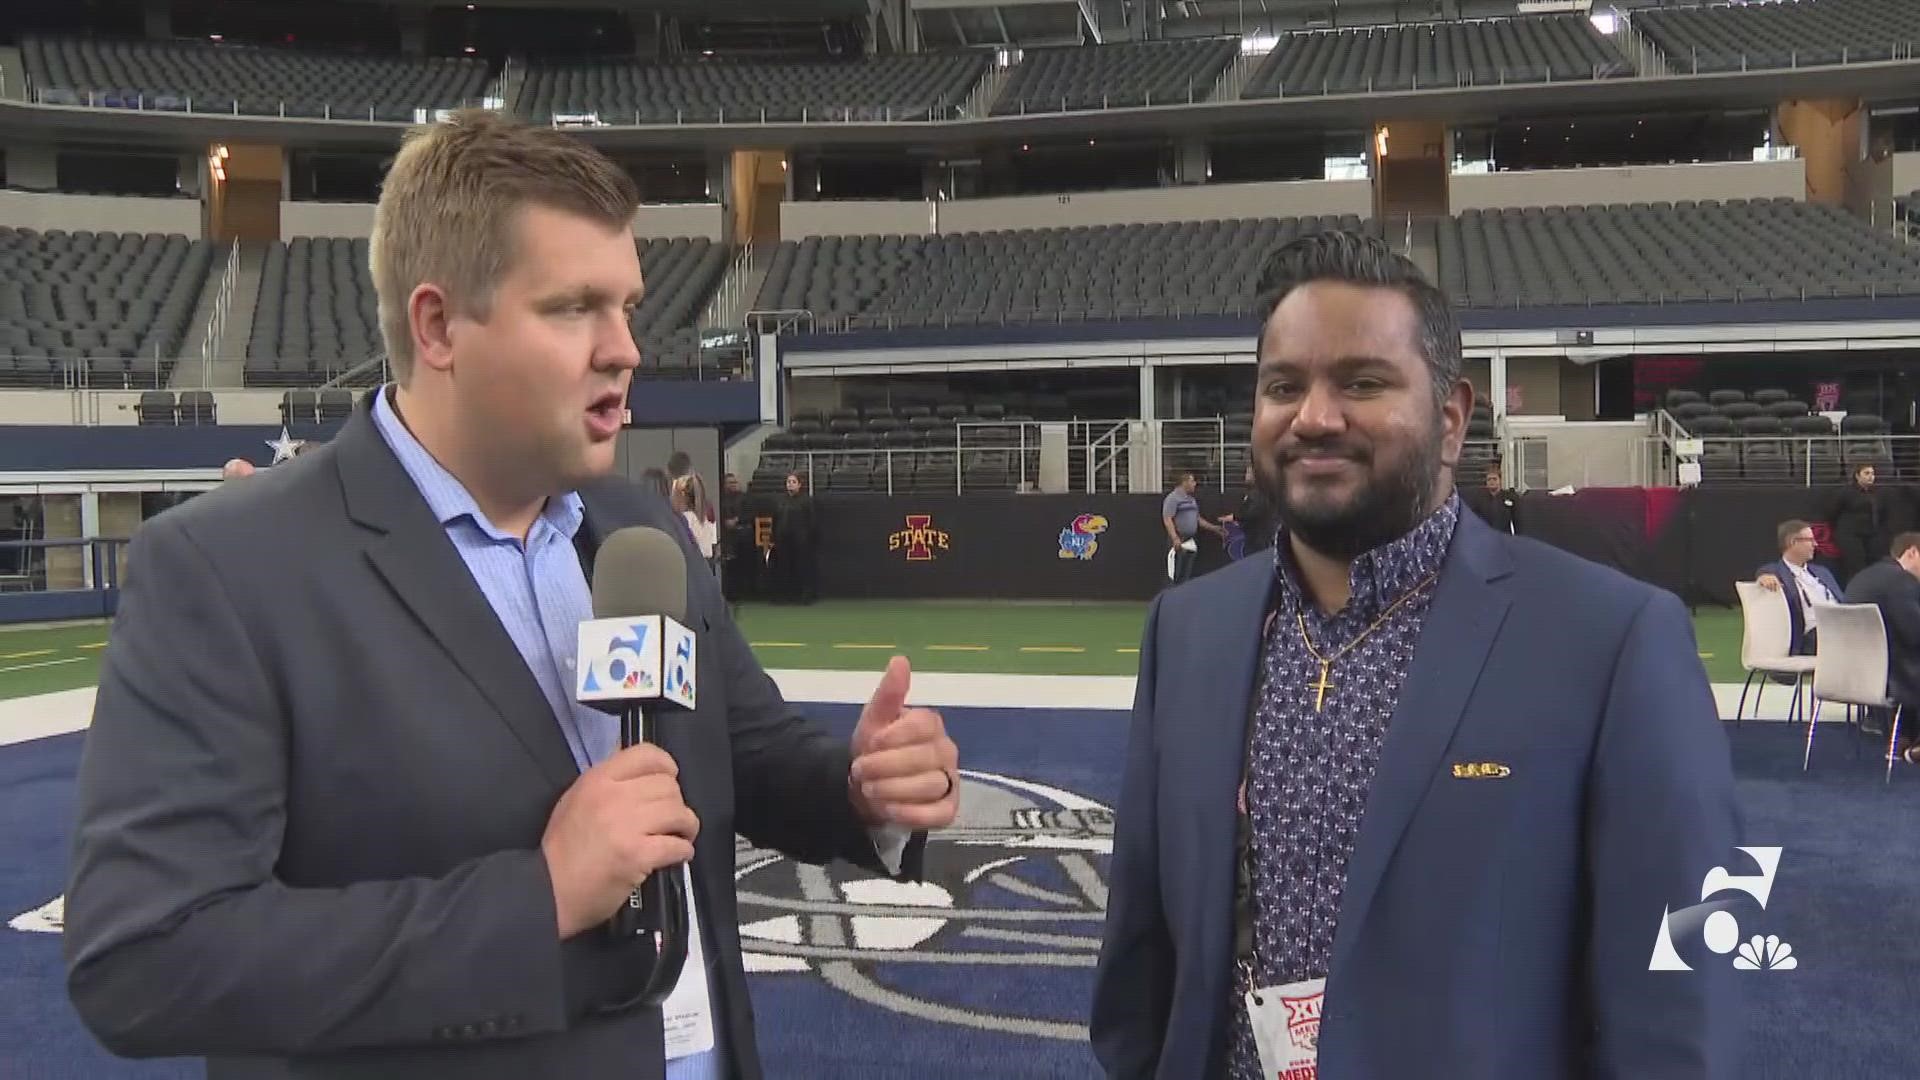 6 Sports caught up with Shehan Jeyarajah from CBS Sports about the Big 12, Brett Yormark, Baylor and who the dark horse will be in 2022.